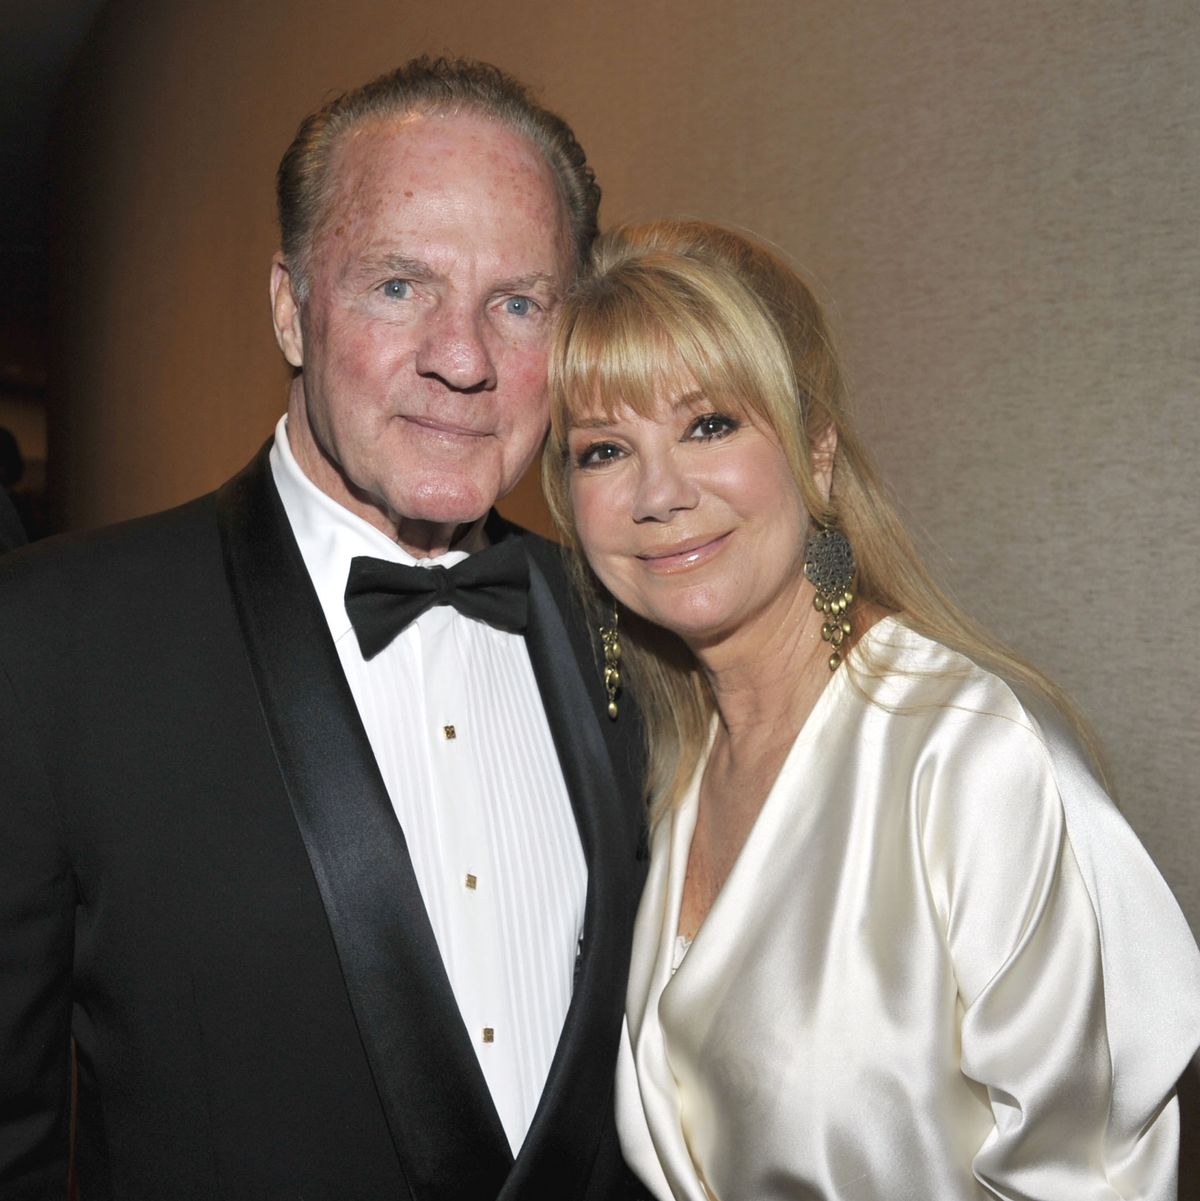 Why Kathie Lee Gifford Forgave Husband Frank After He Cheated